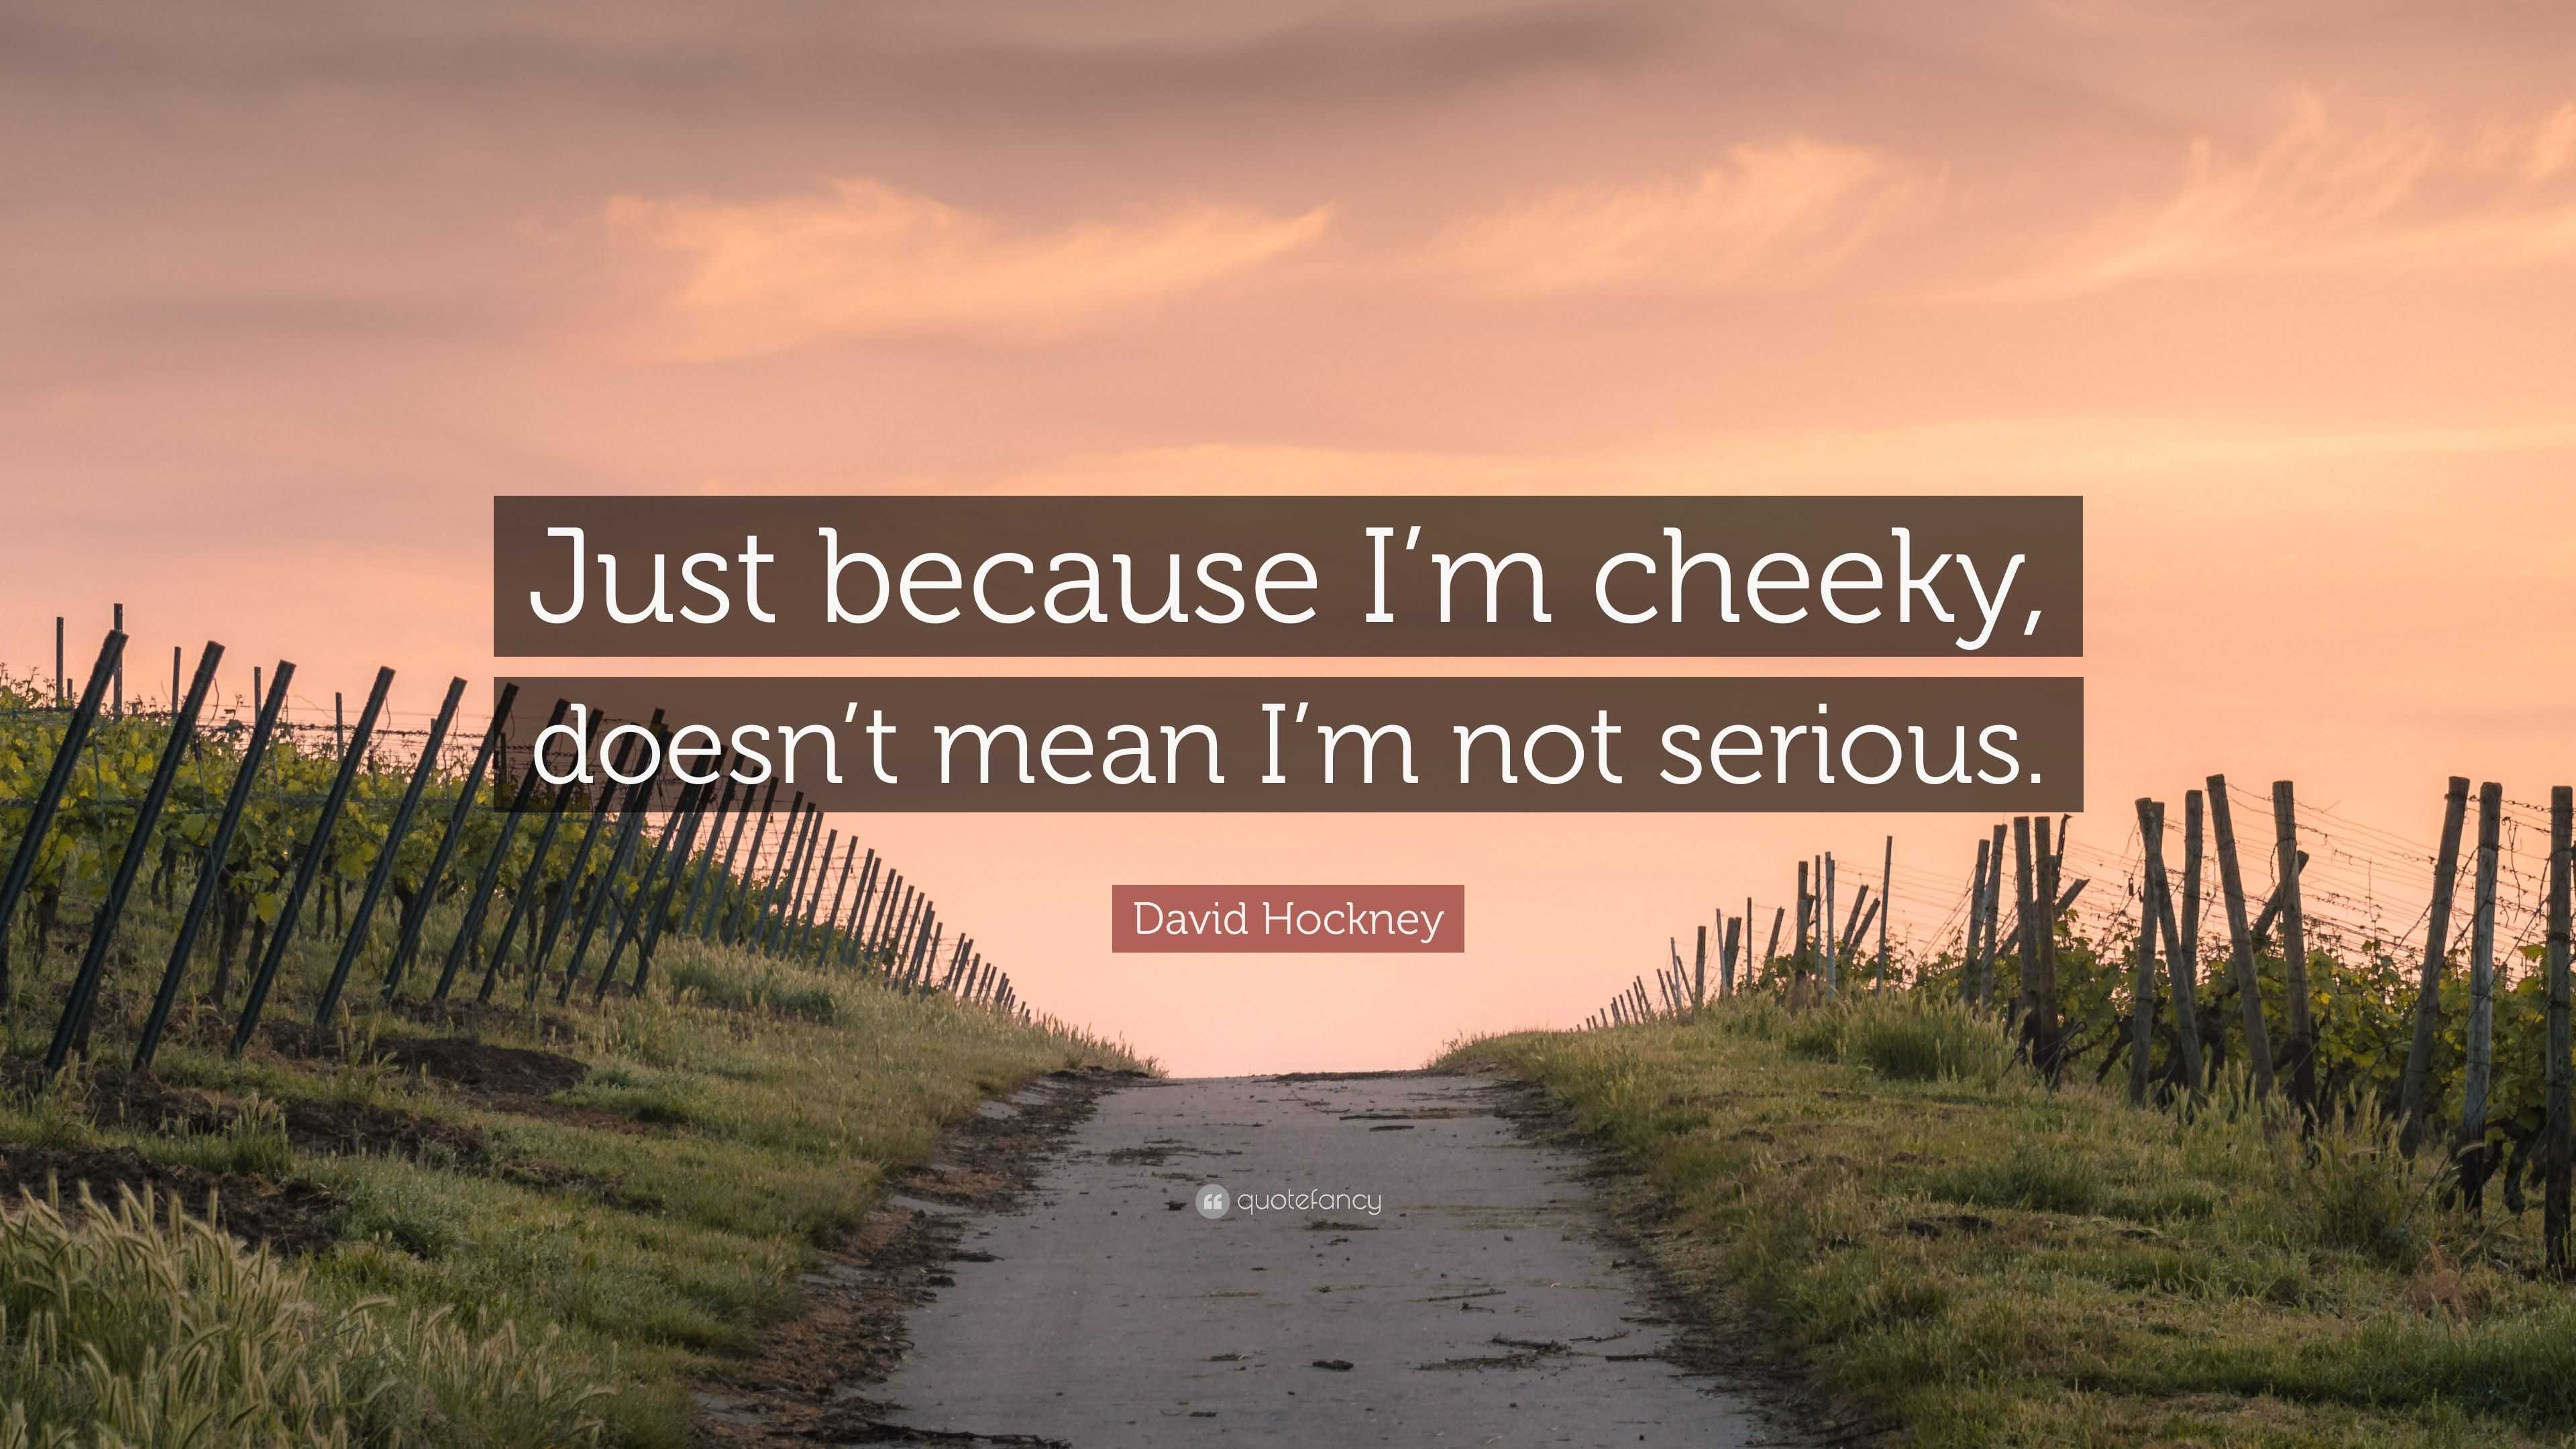 David Hockney Quote: “Just because I'm cheeky, doesn't mean I'm not  serious.”